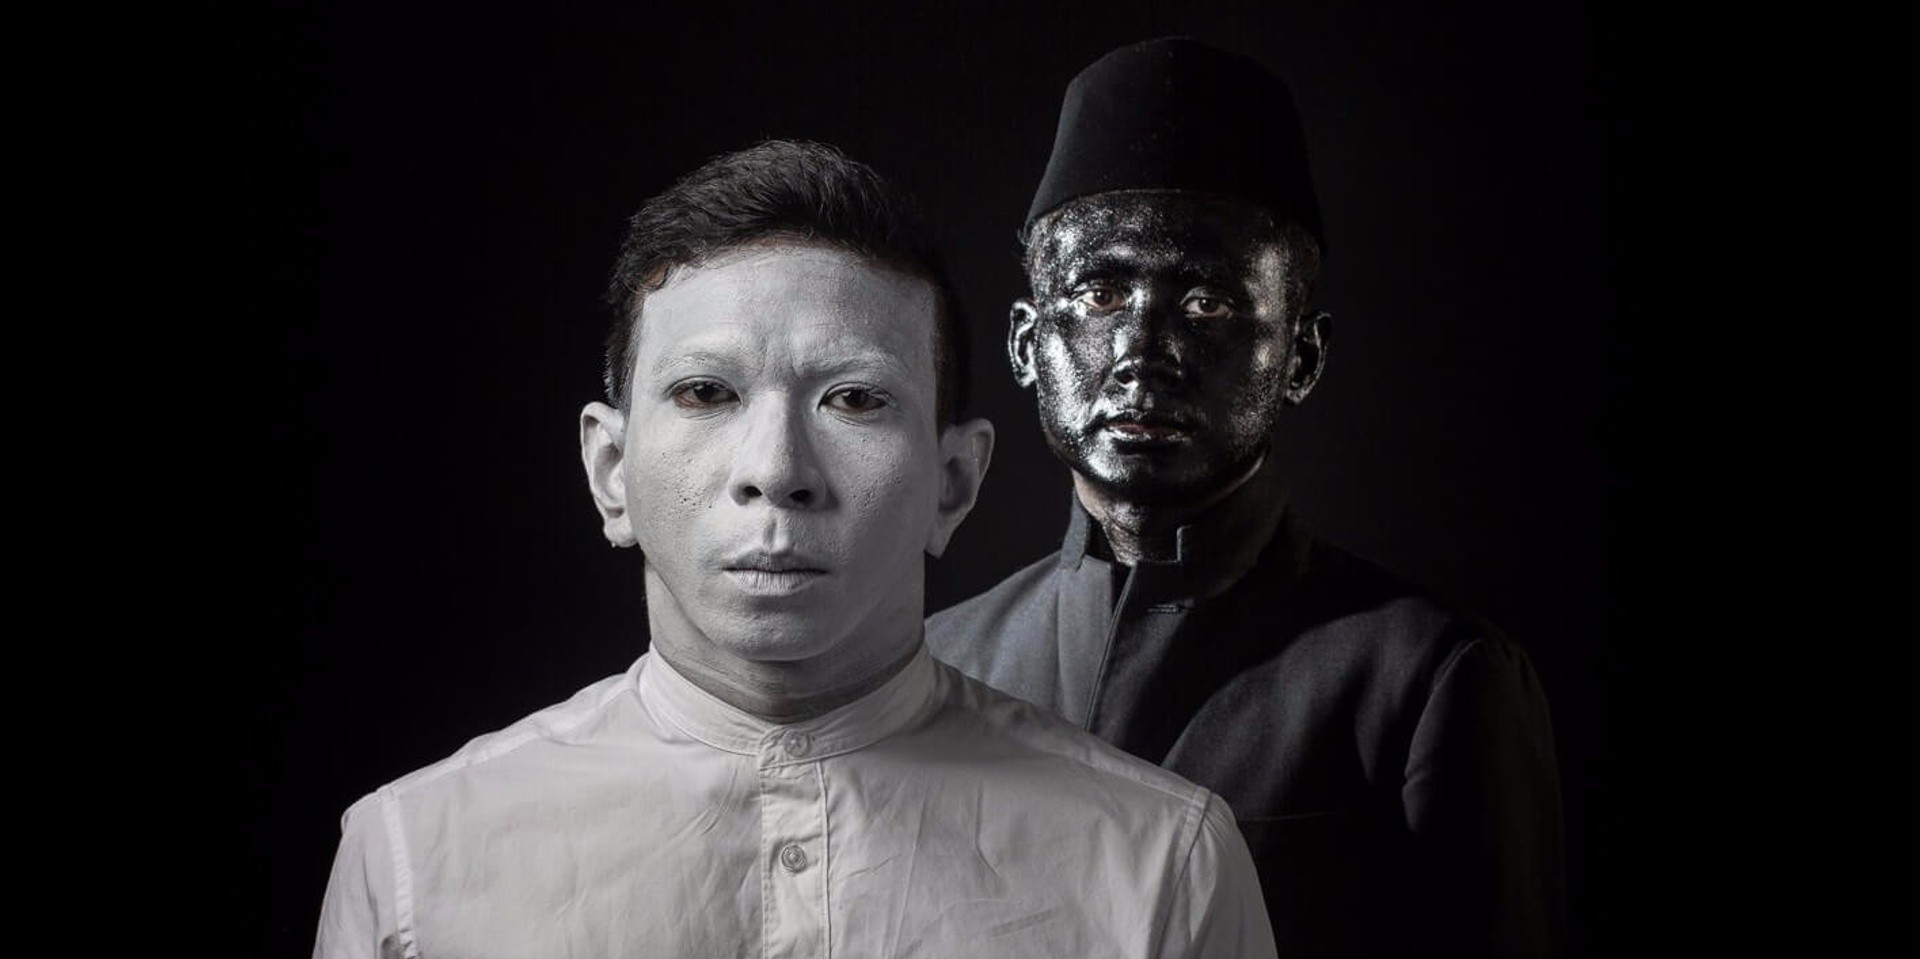 WATCH: The ever-shifting faces of NADA coalesce on their trippy 'Dondang Astatke' music video